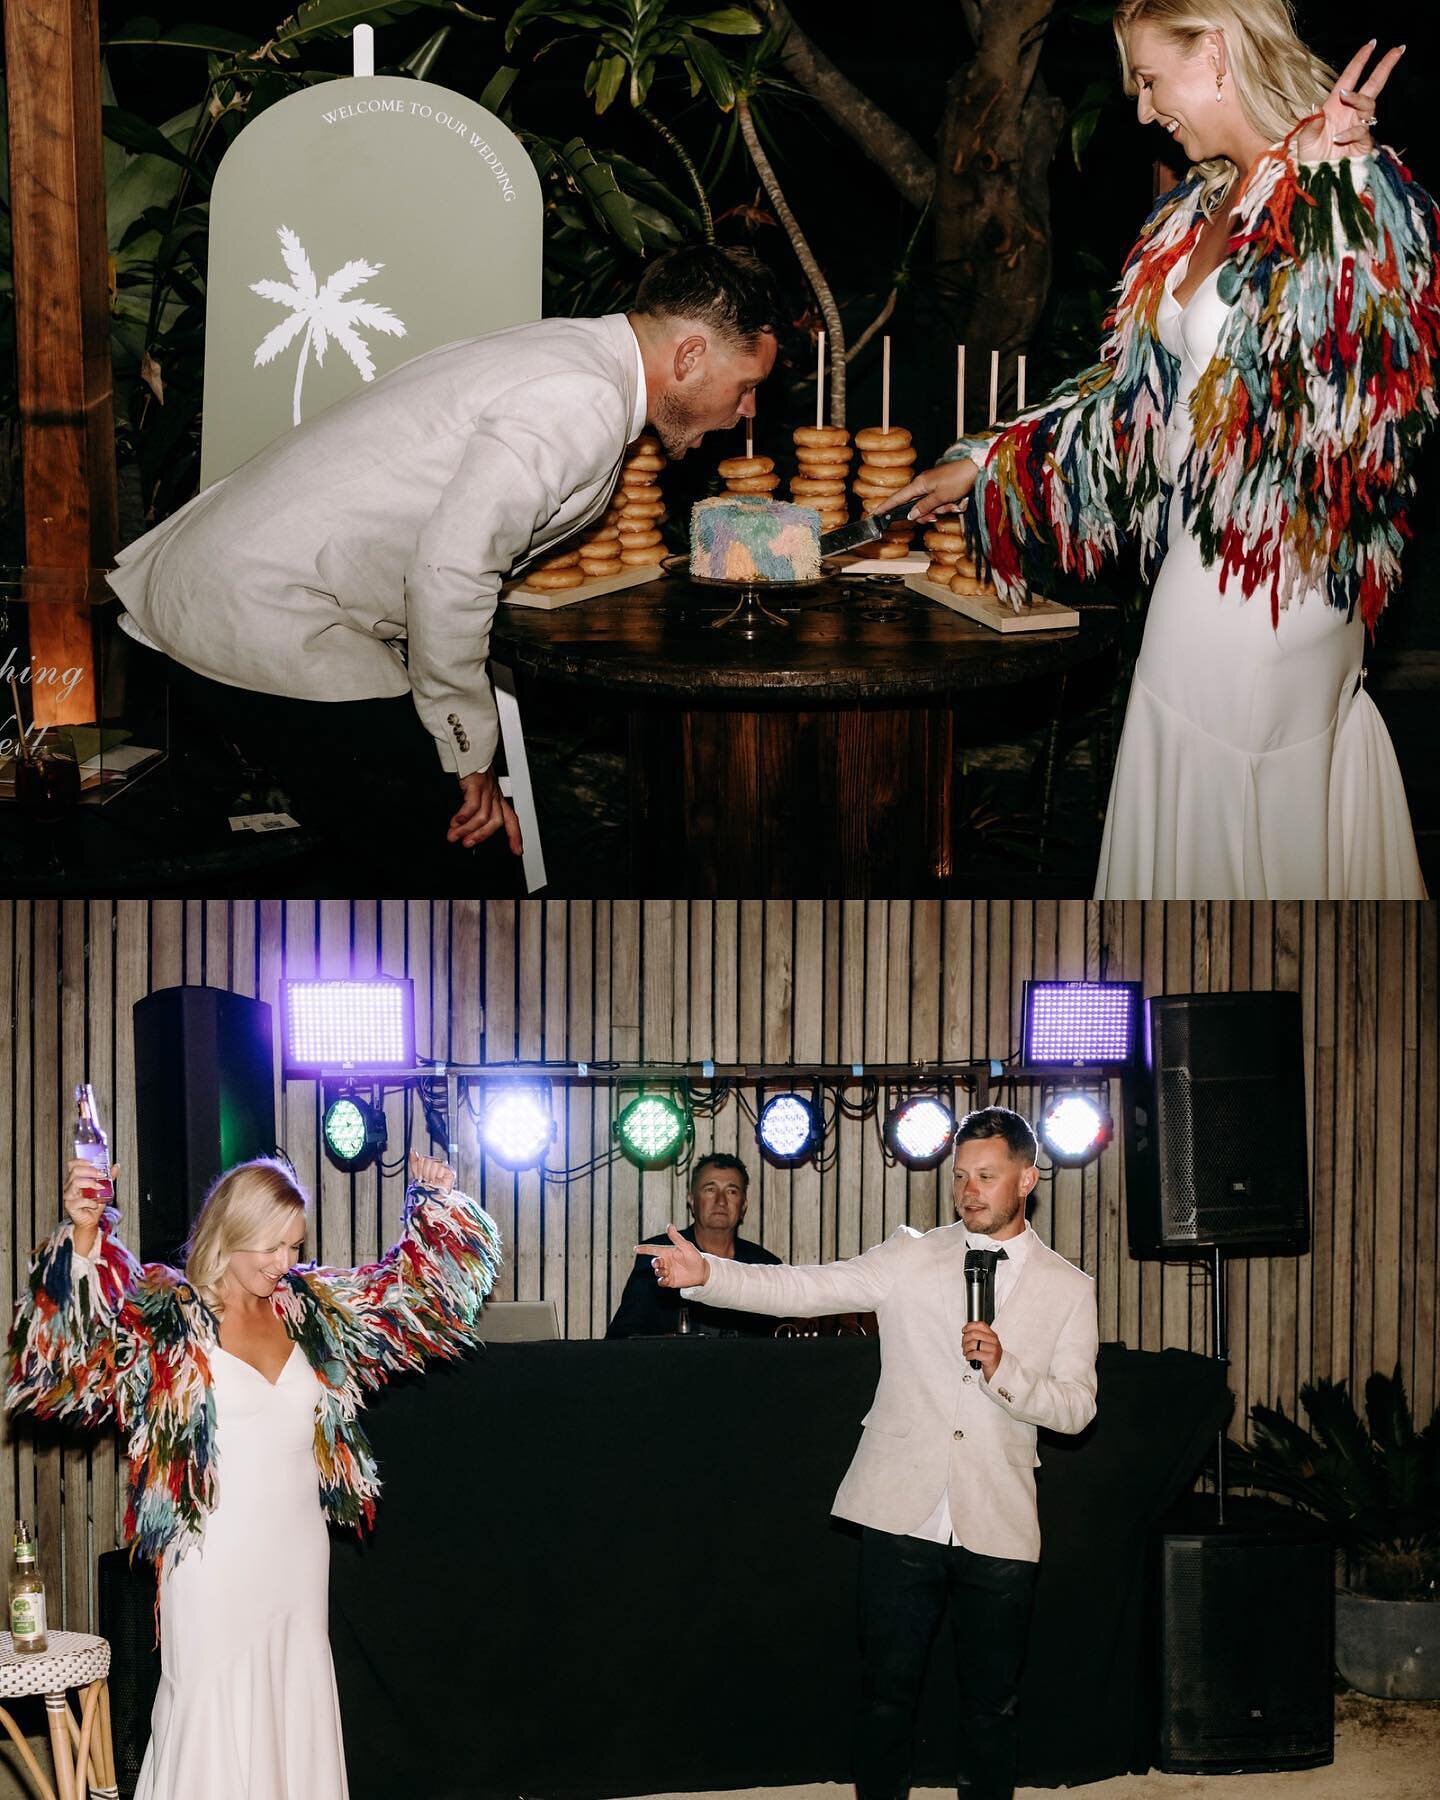 Josh &amp; Kelsea - what a blast they had!
Shout out to the amazing vendors that pulled this magical night together. 

🍔 @char_bar_catering 
🍸 @romeobarpmq 
🪞 @emmalillystyling 
📸  @seedandsalt_photography 
💒 @thelovewarriorcelebrant 
💄 @gypsyg